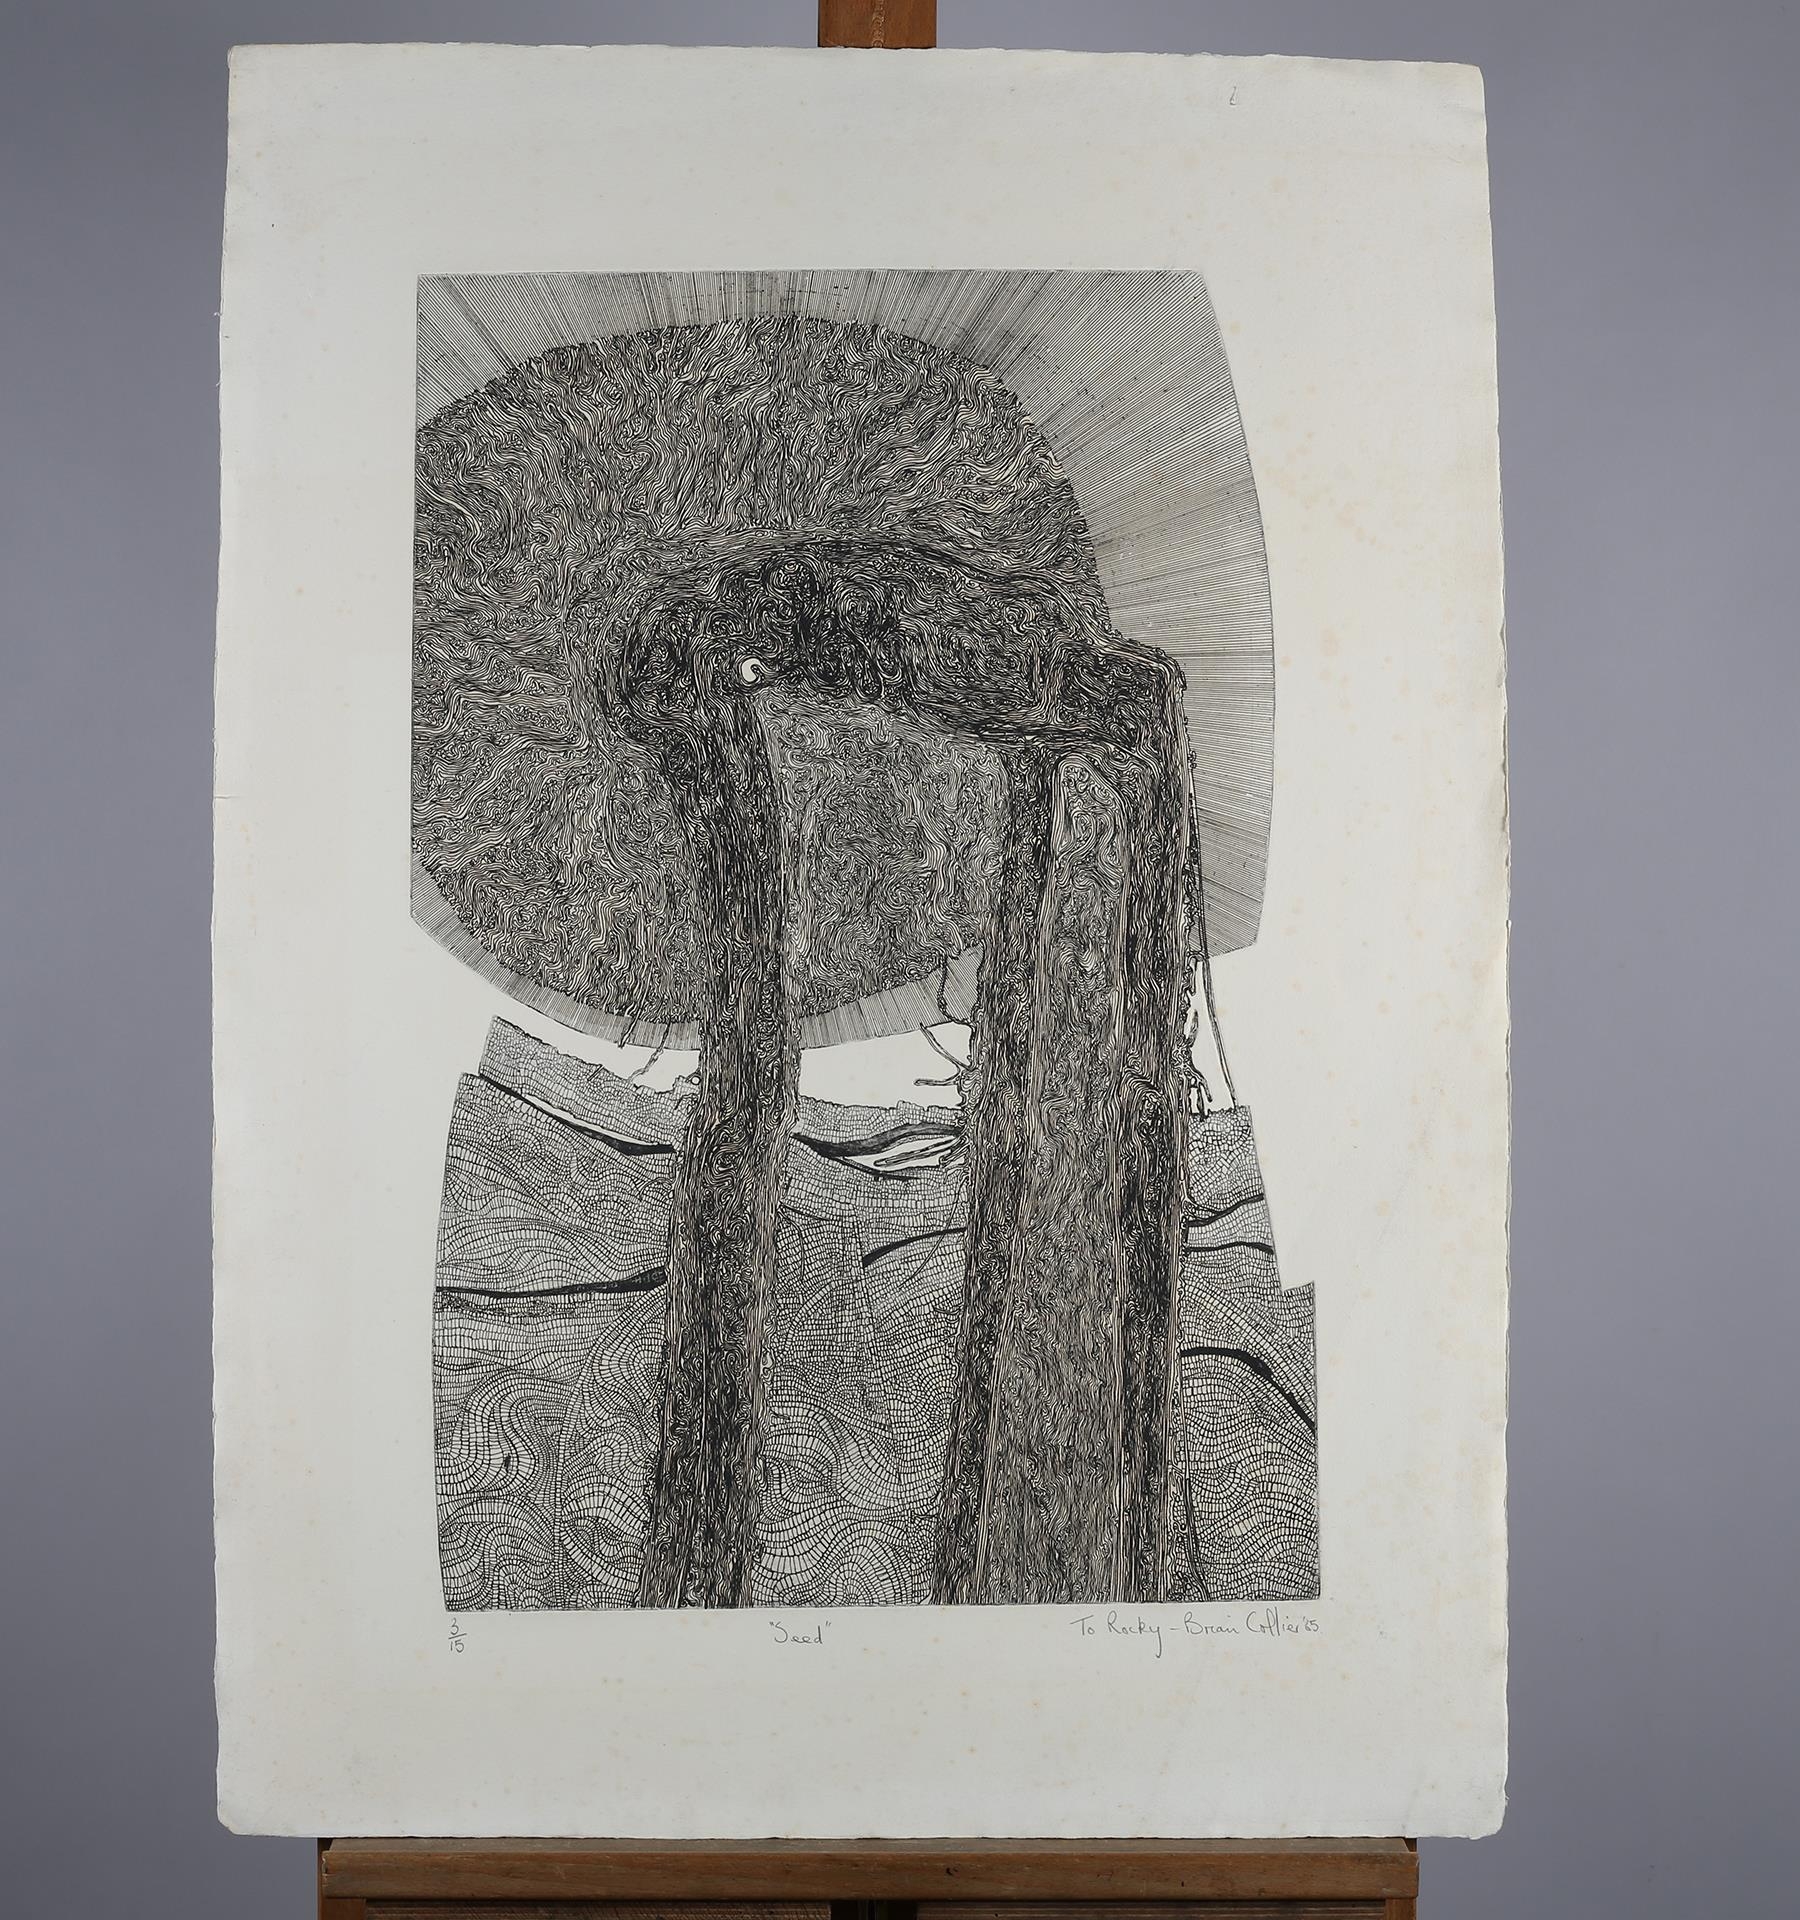 ARR By and after Brian Collier, 'Seed', black and white etching, 3/15, titled, signed and dated 1965 - Image 2 of 4